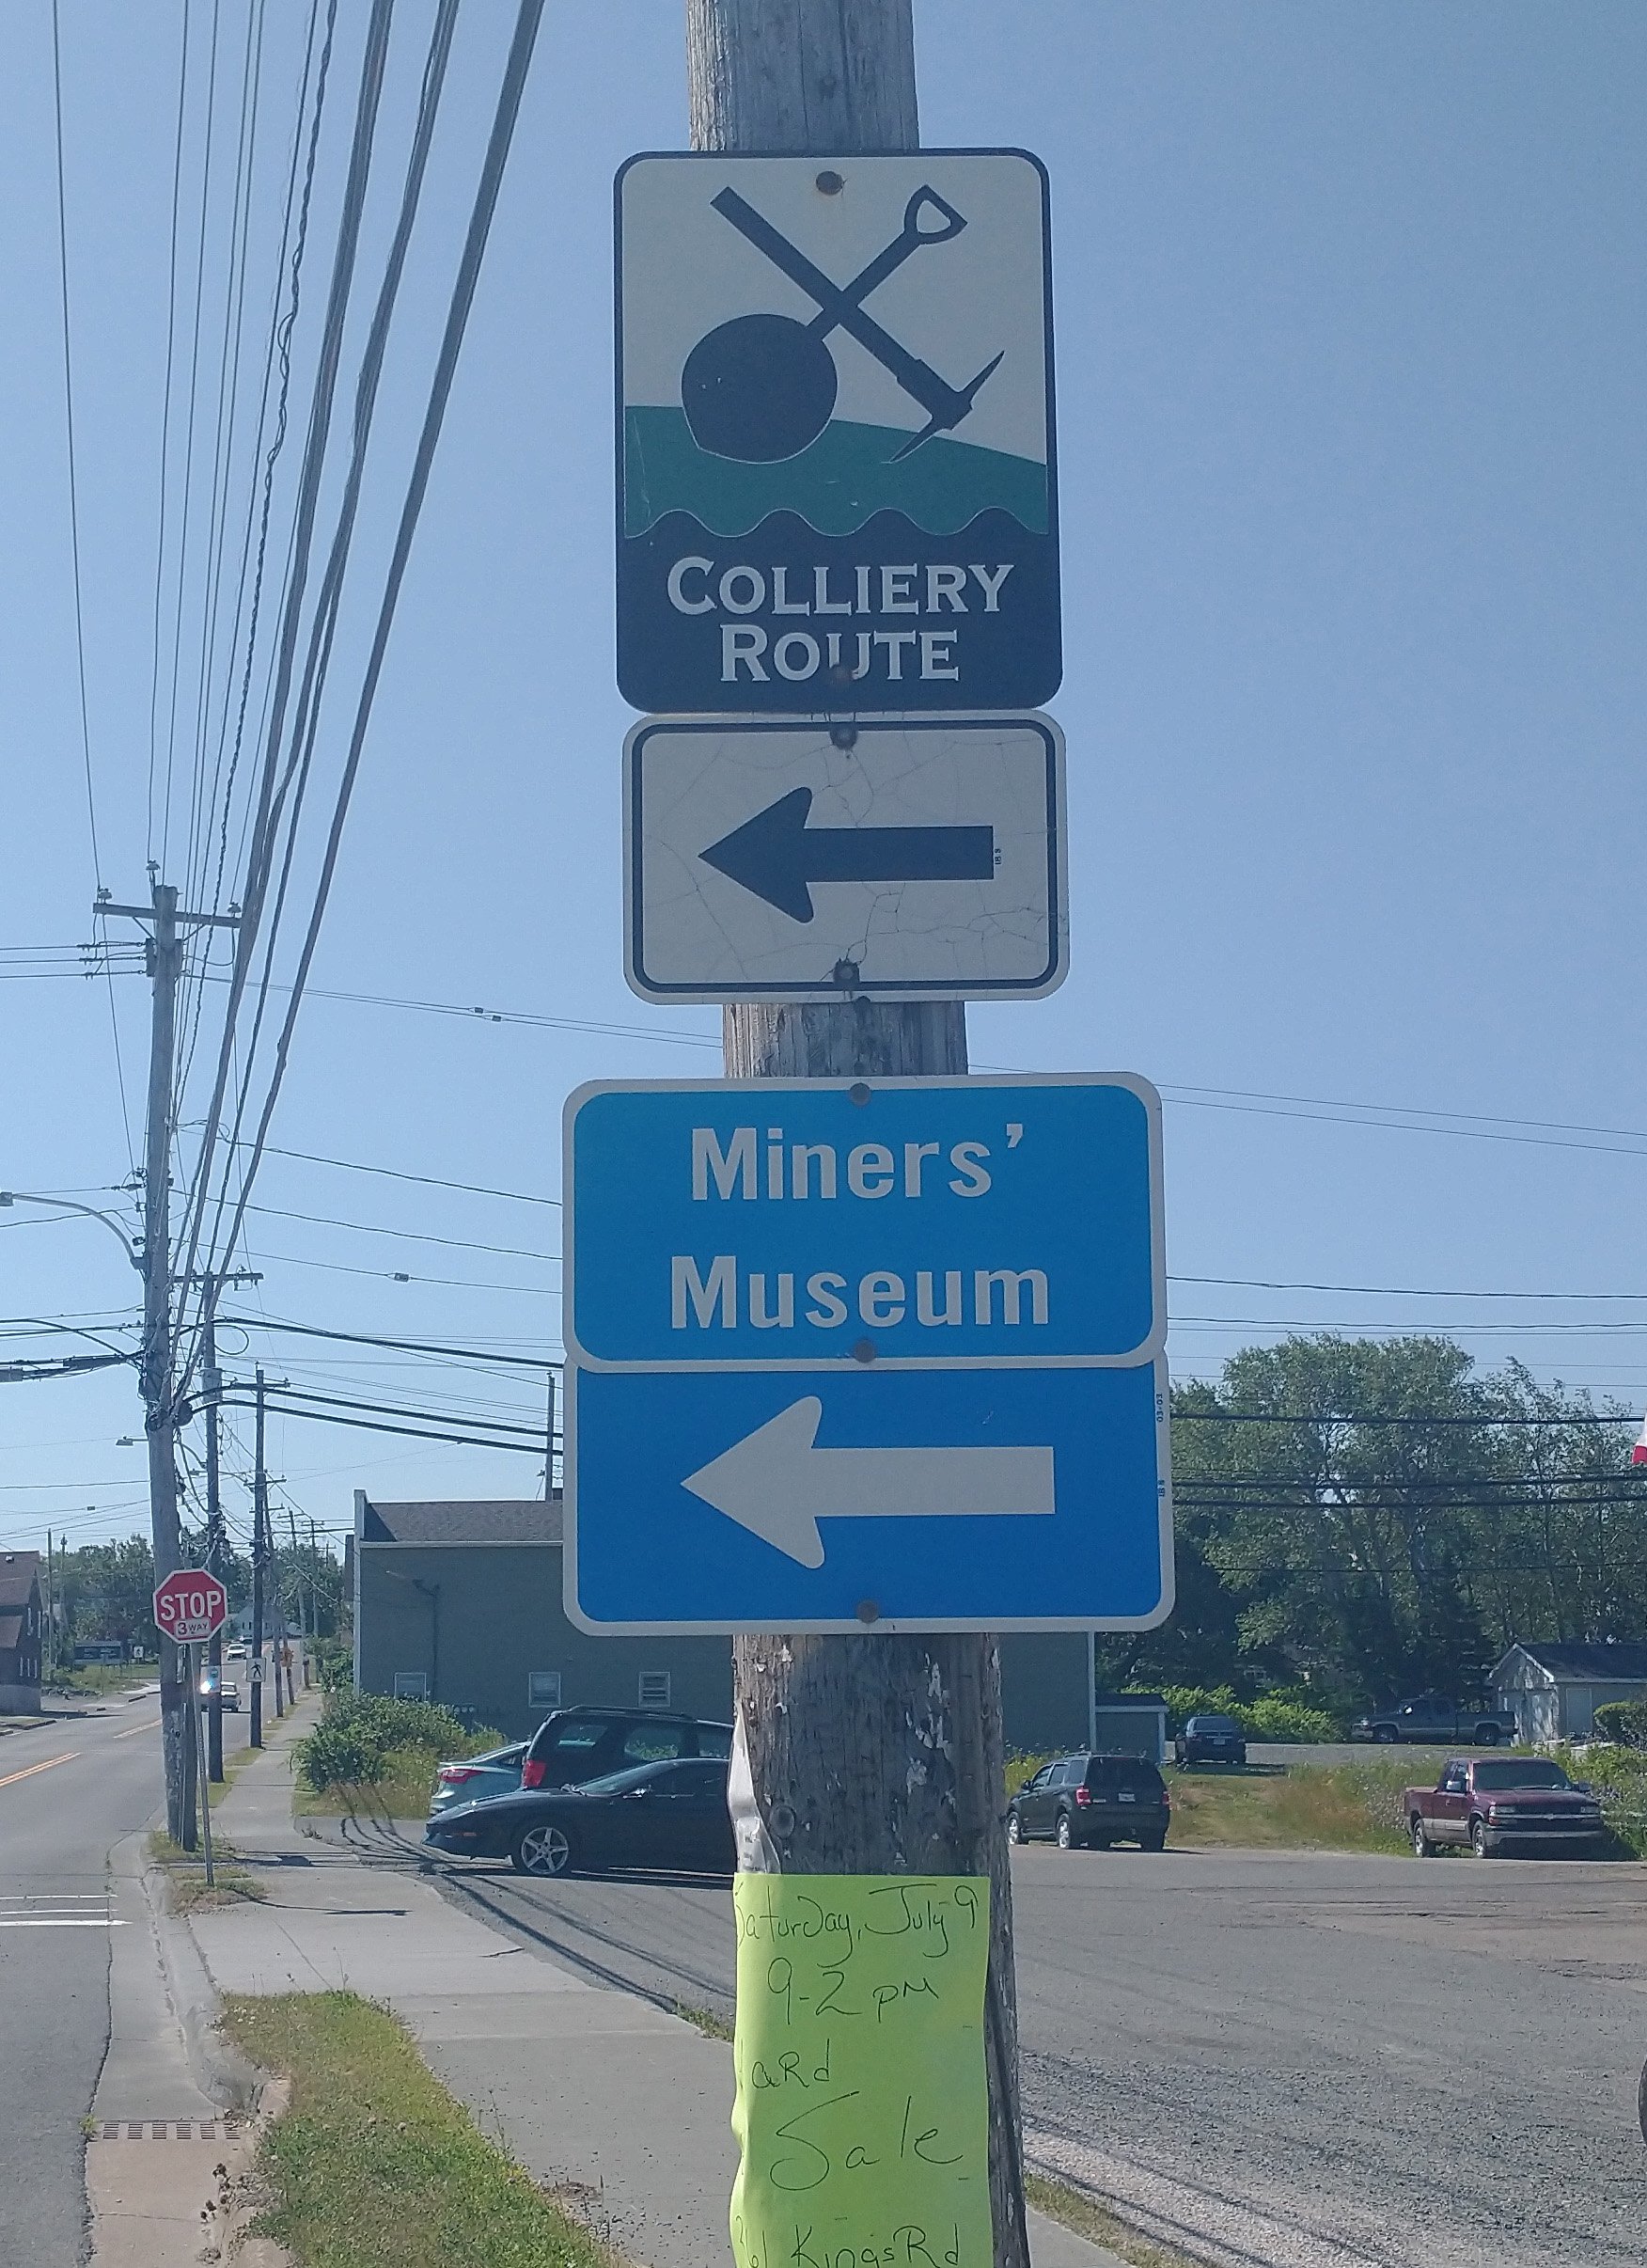 Every little town has a museum in Canada. It's amazing. There must be thousands.